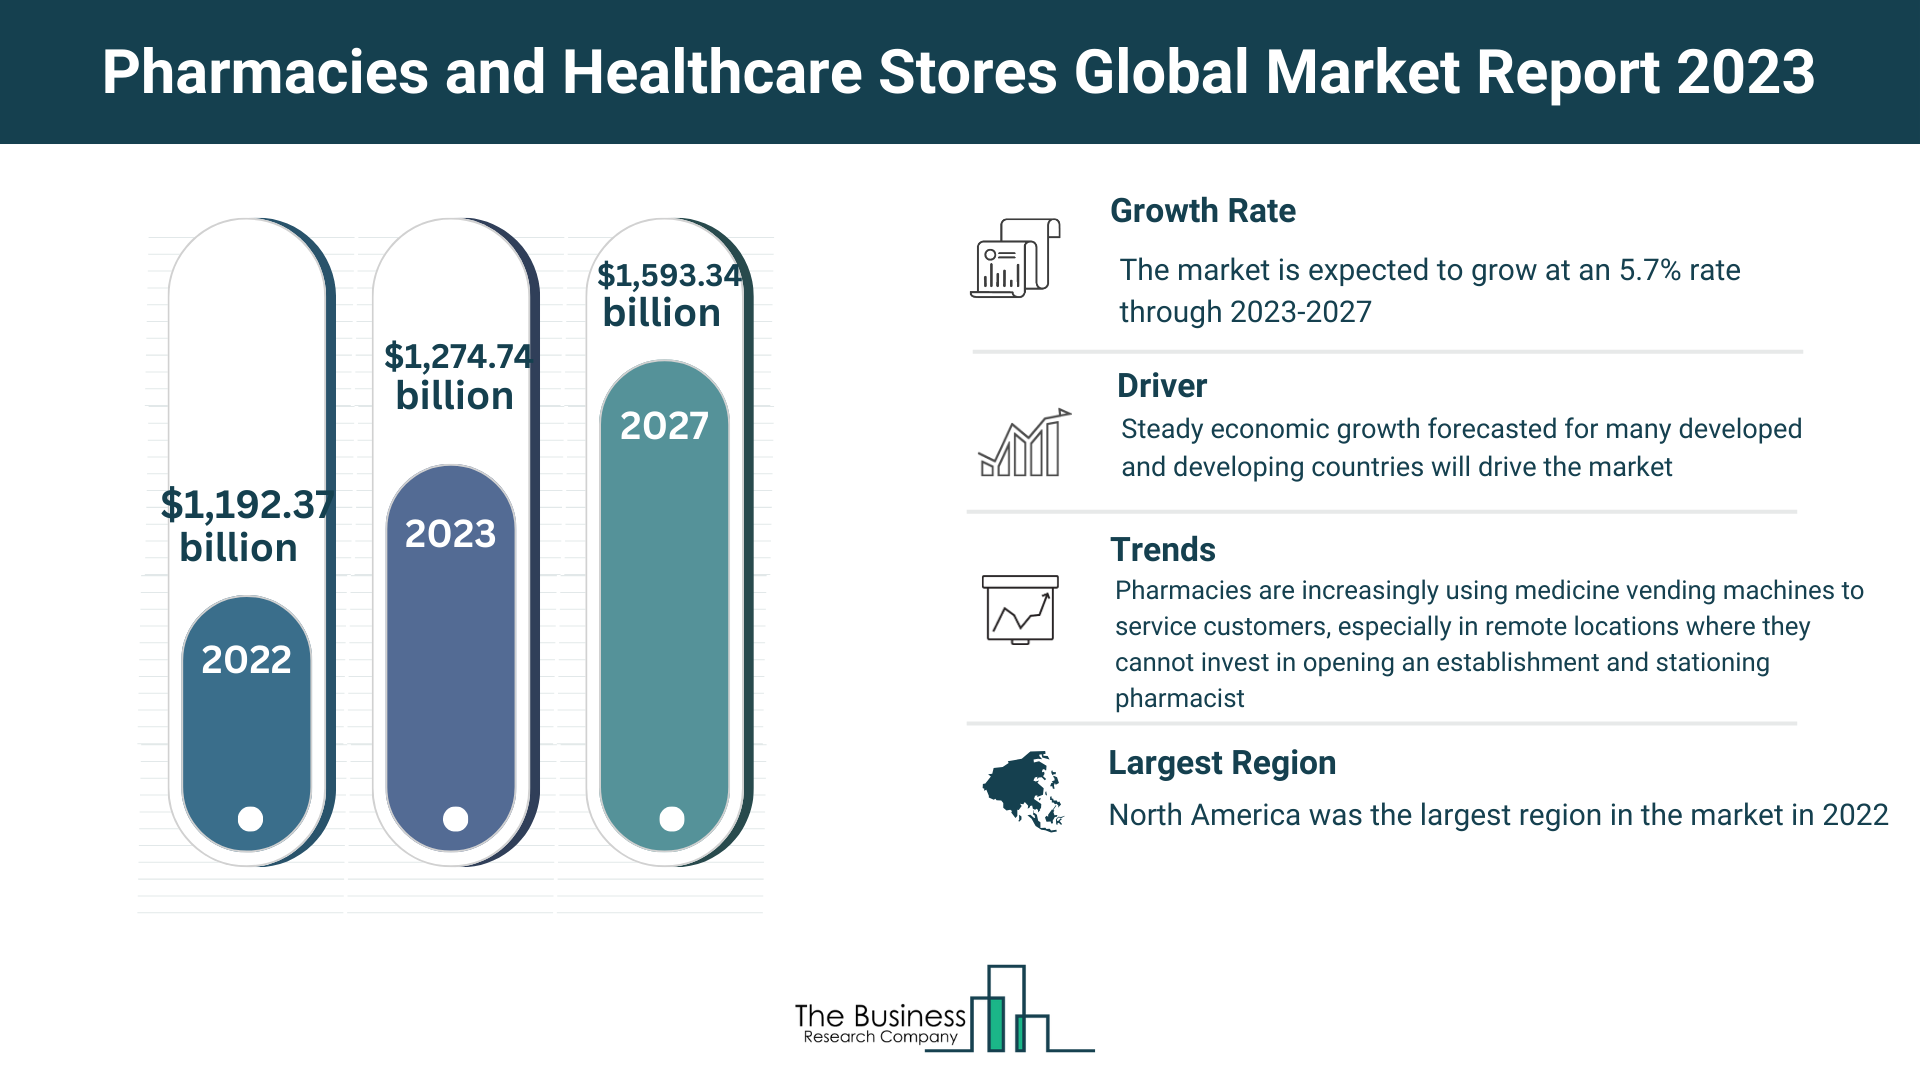 Global Pharmacies and Healthcare Stores Market